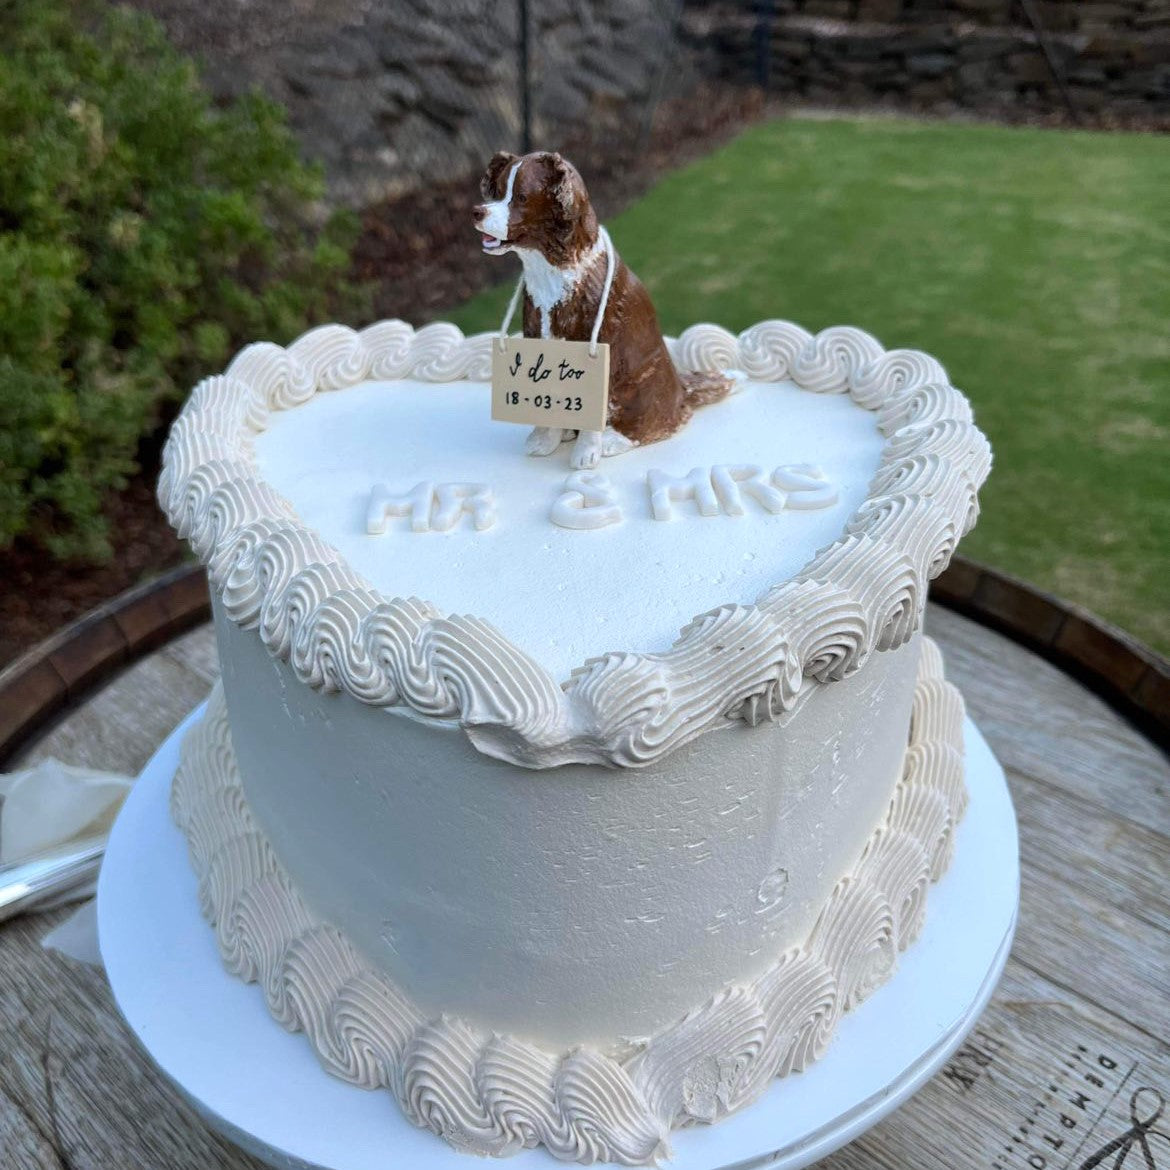 Brown border collie handmade custom dog cake topper on a heart shaped cream wedding cake showing the letters Mr & Mrs.